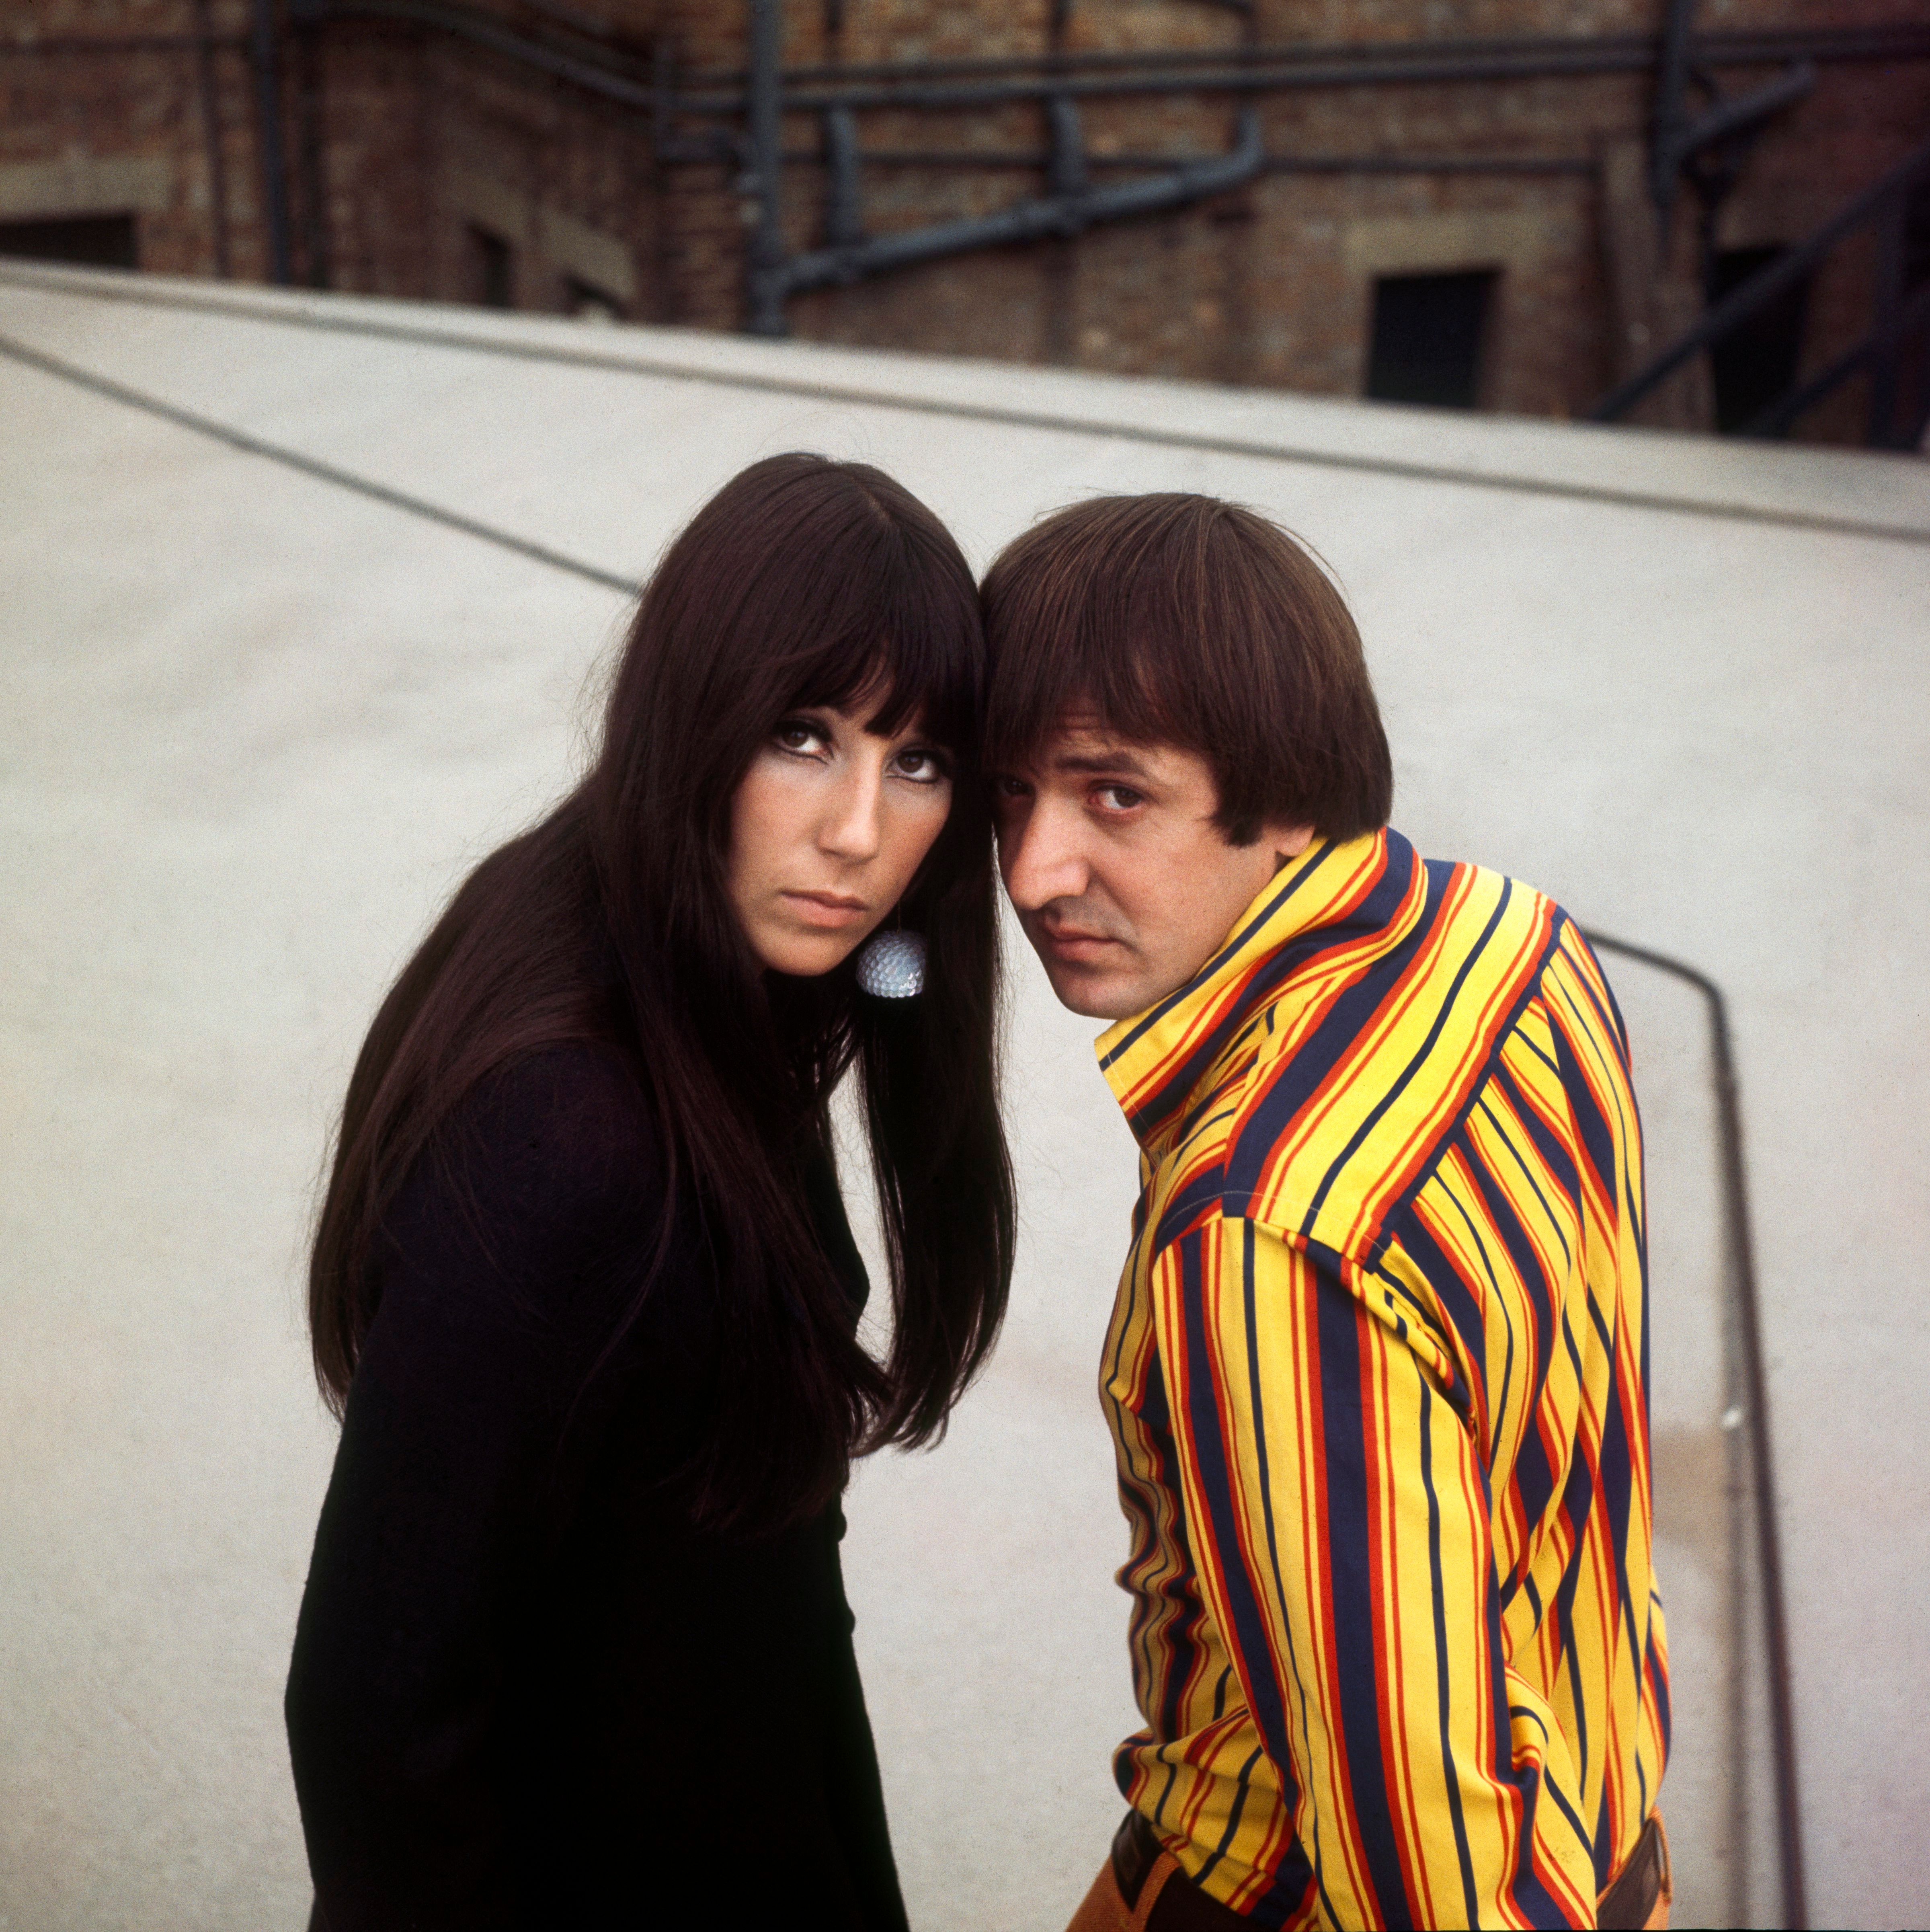 Cher and Sonny Bono in London on January 1, 1973 | Photo: George Wilkes/Hulton Archive/Getty Images